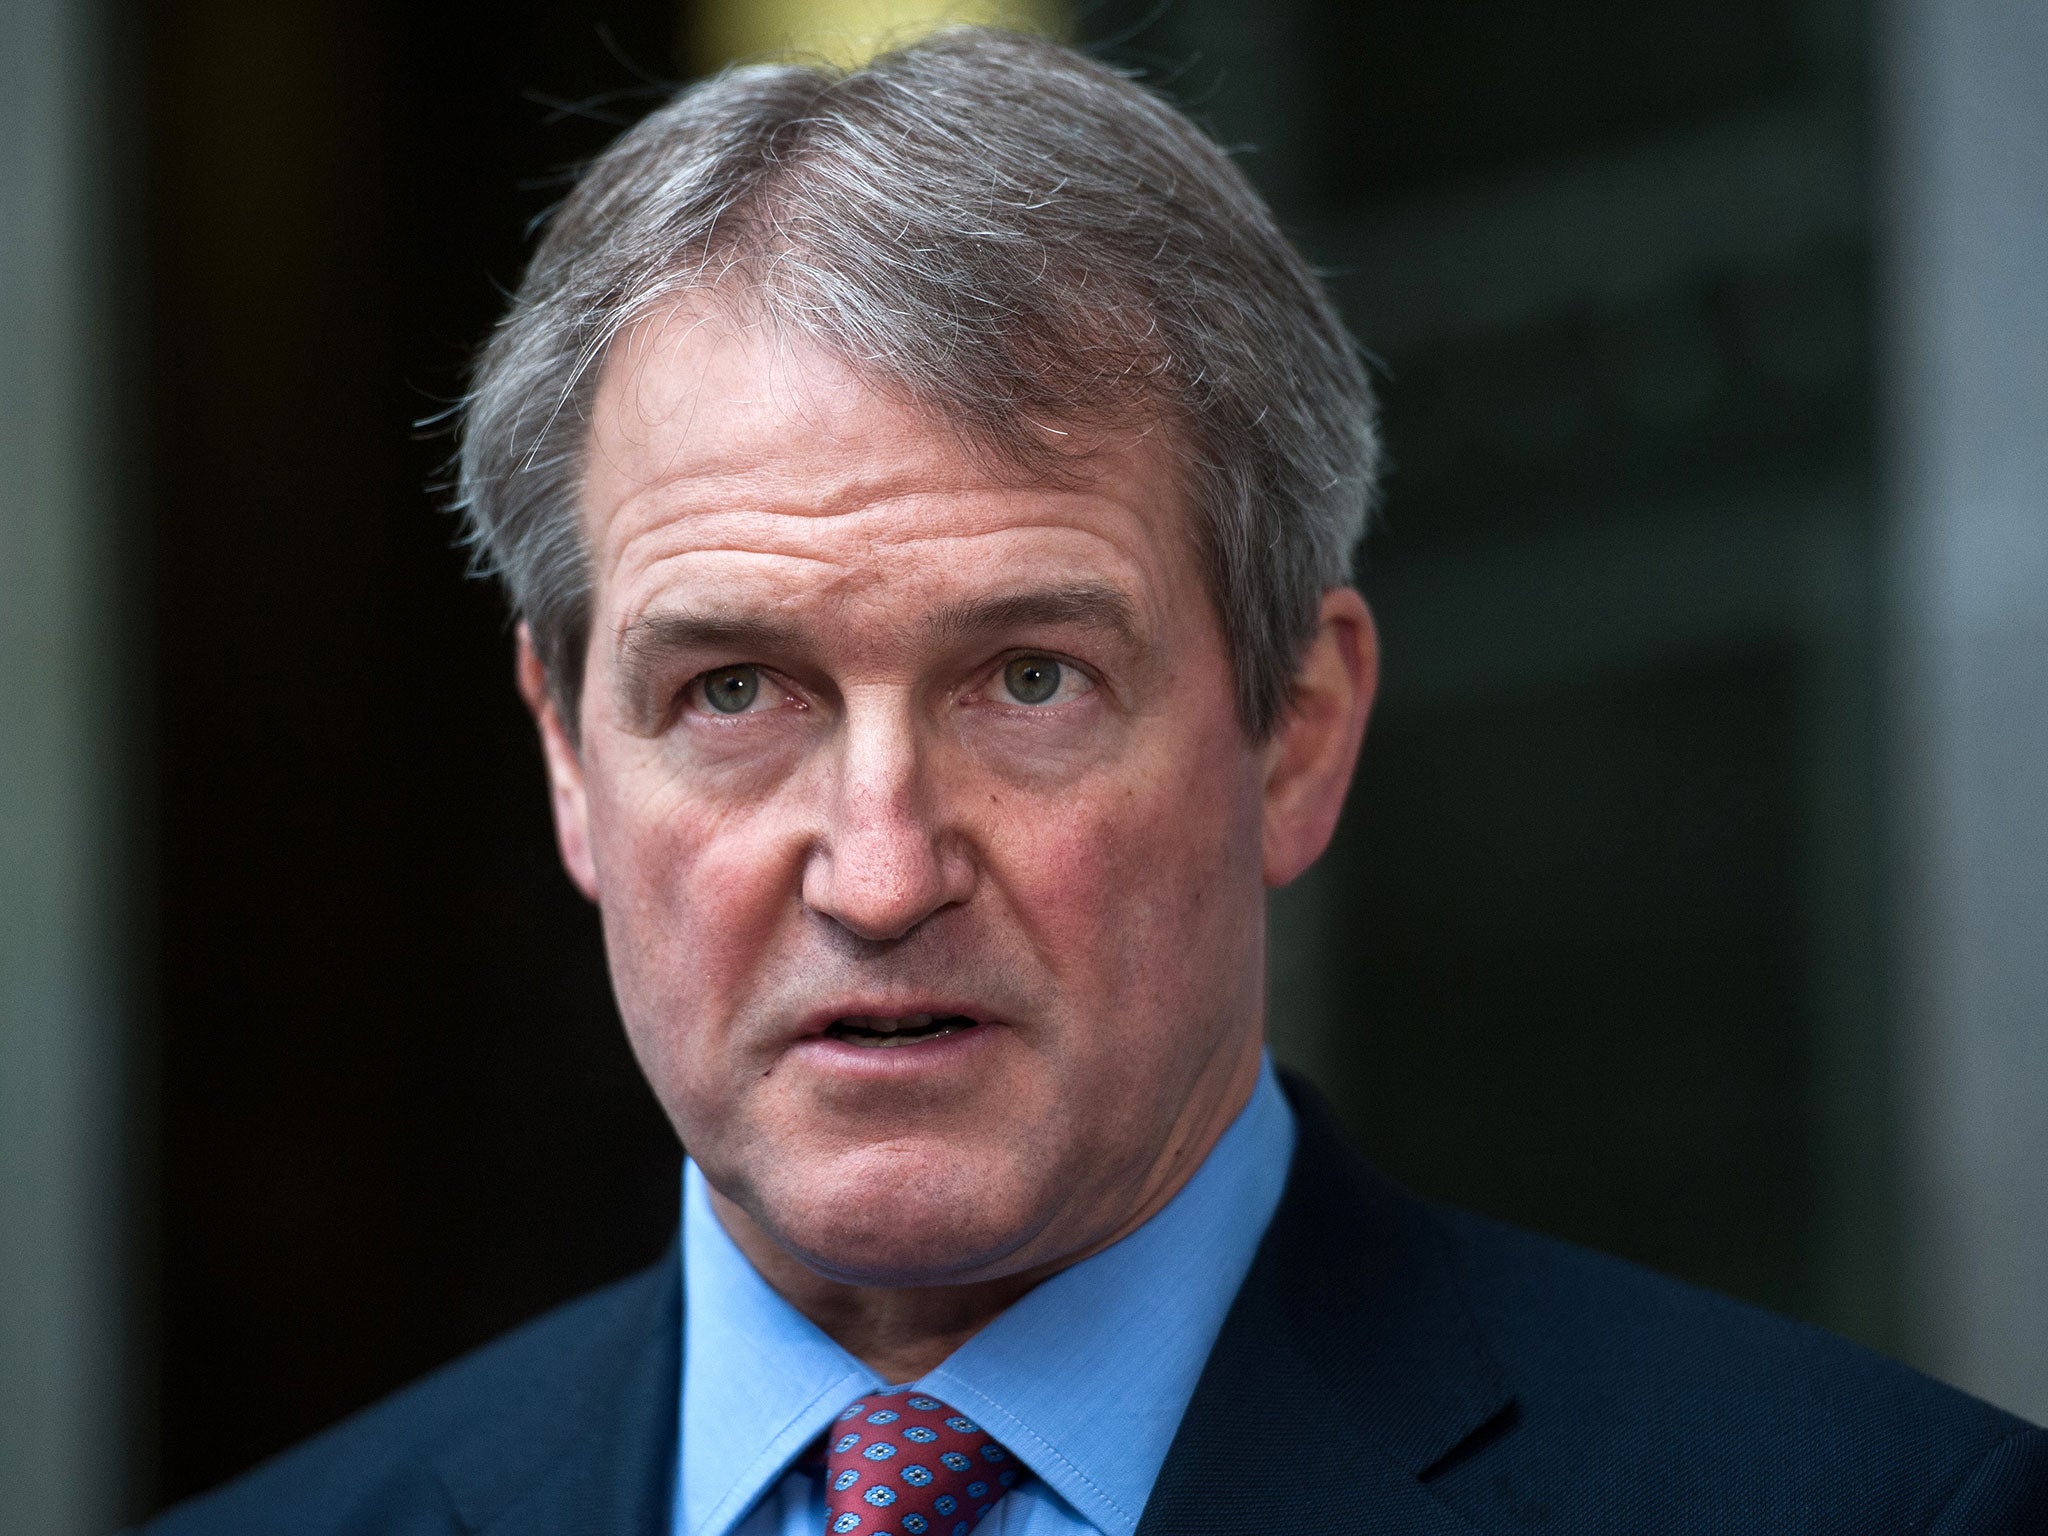 Owen Paterson is to deliver the annual lecture to the Global Warming Policy Foundation